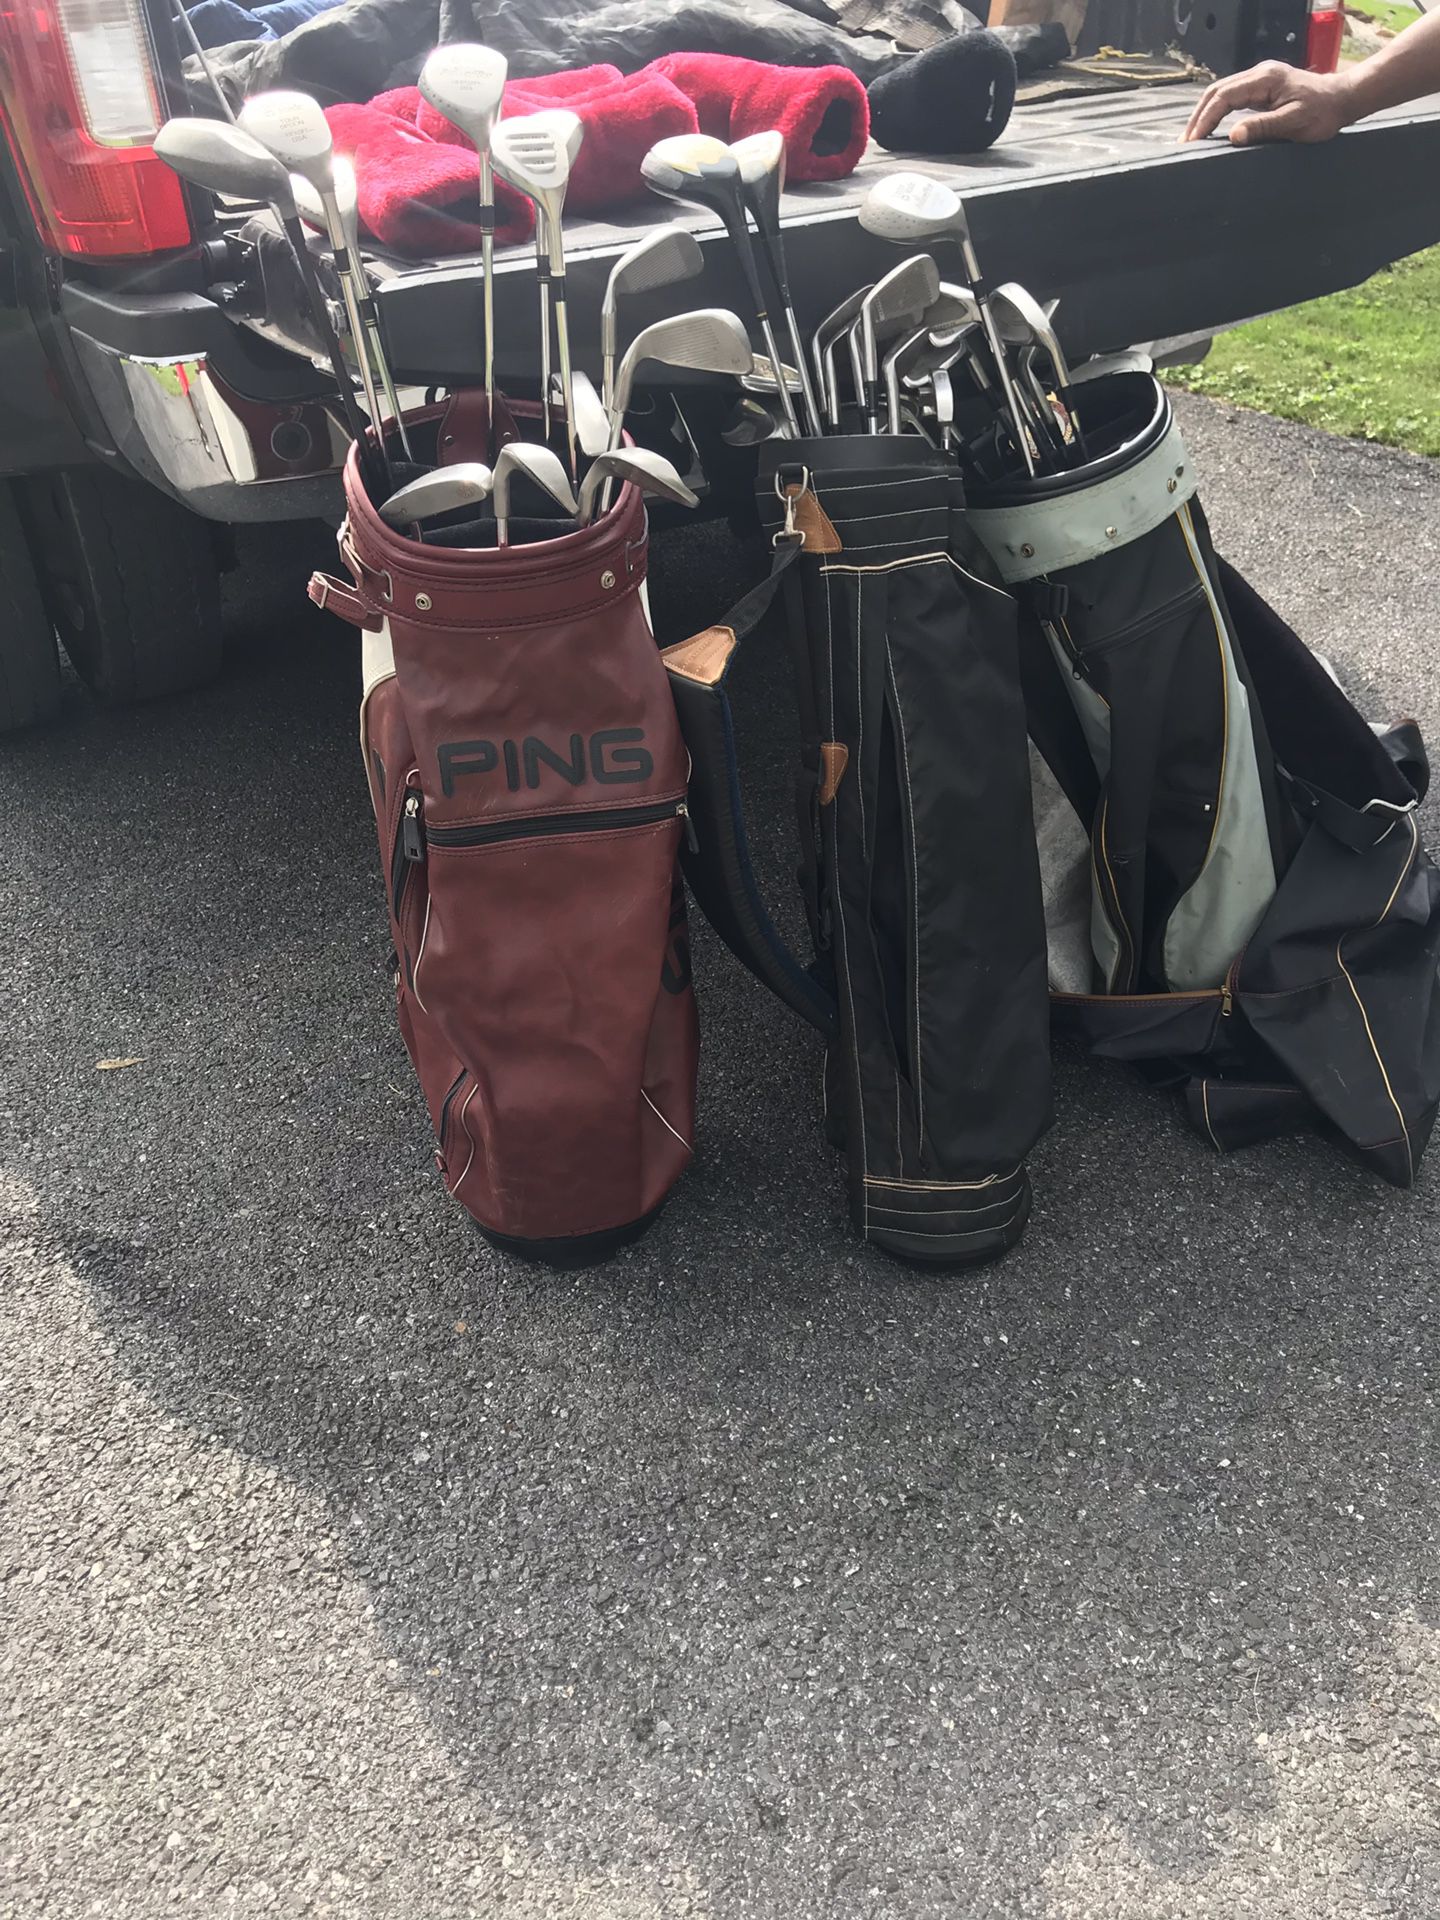 Golf club sets and bags